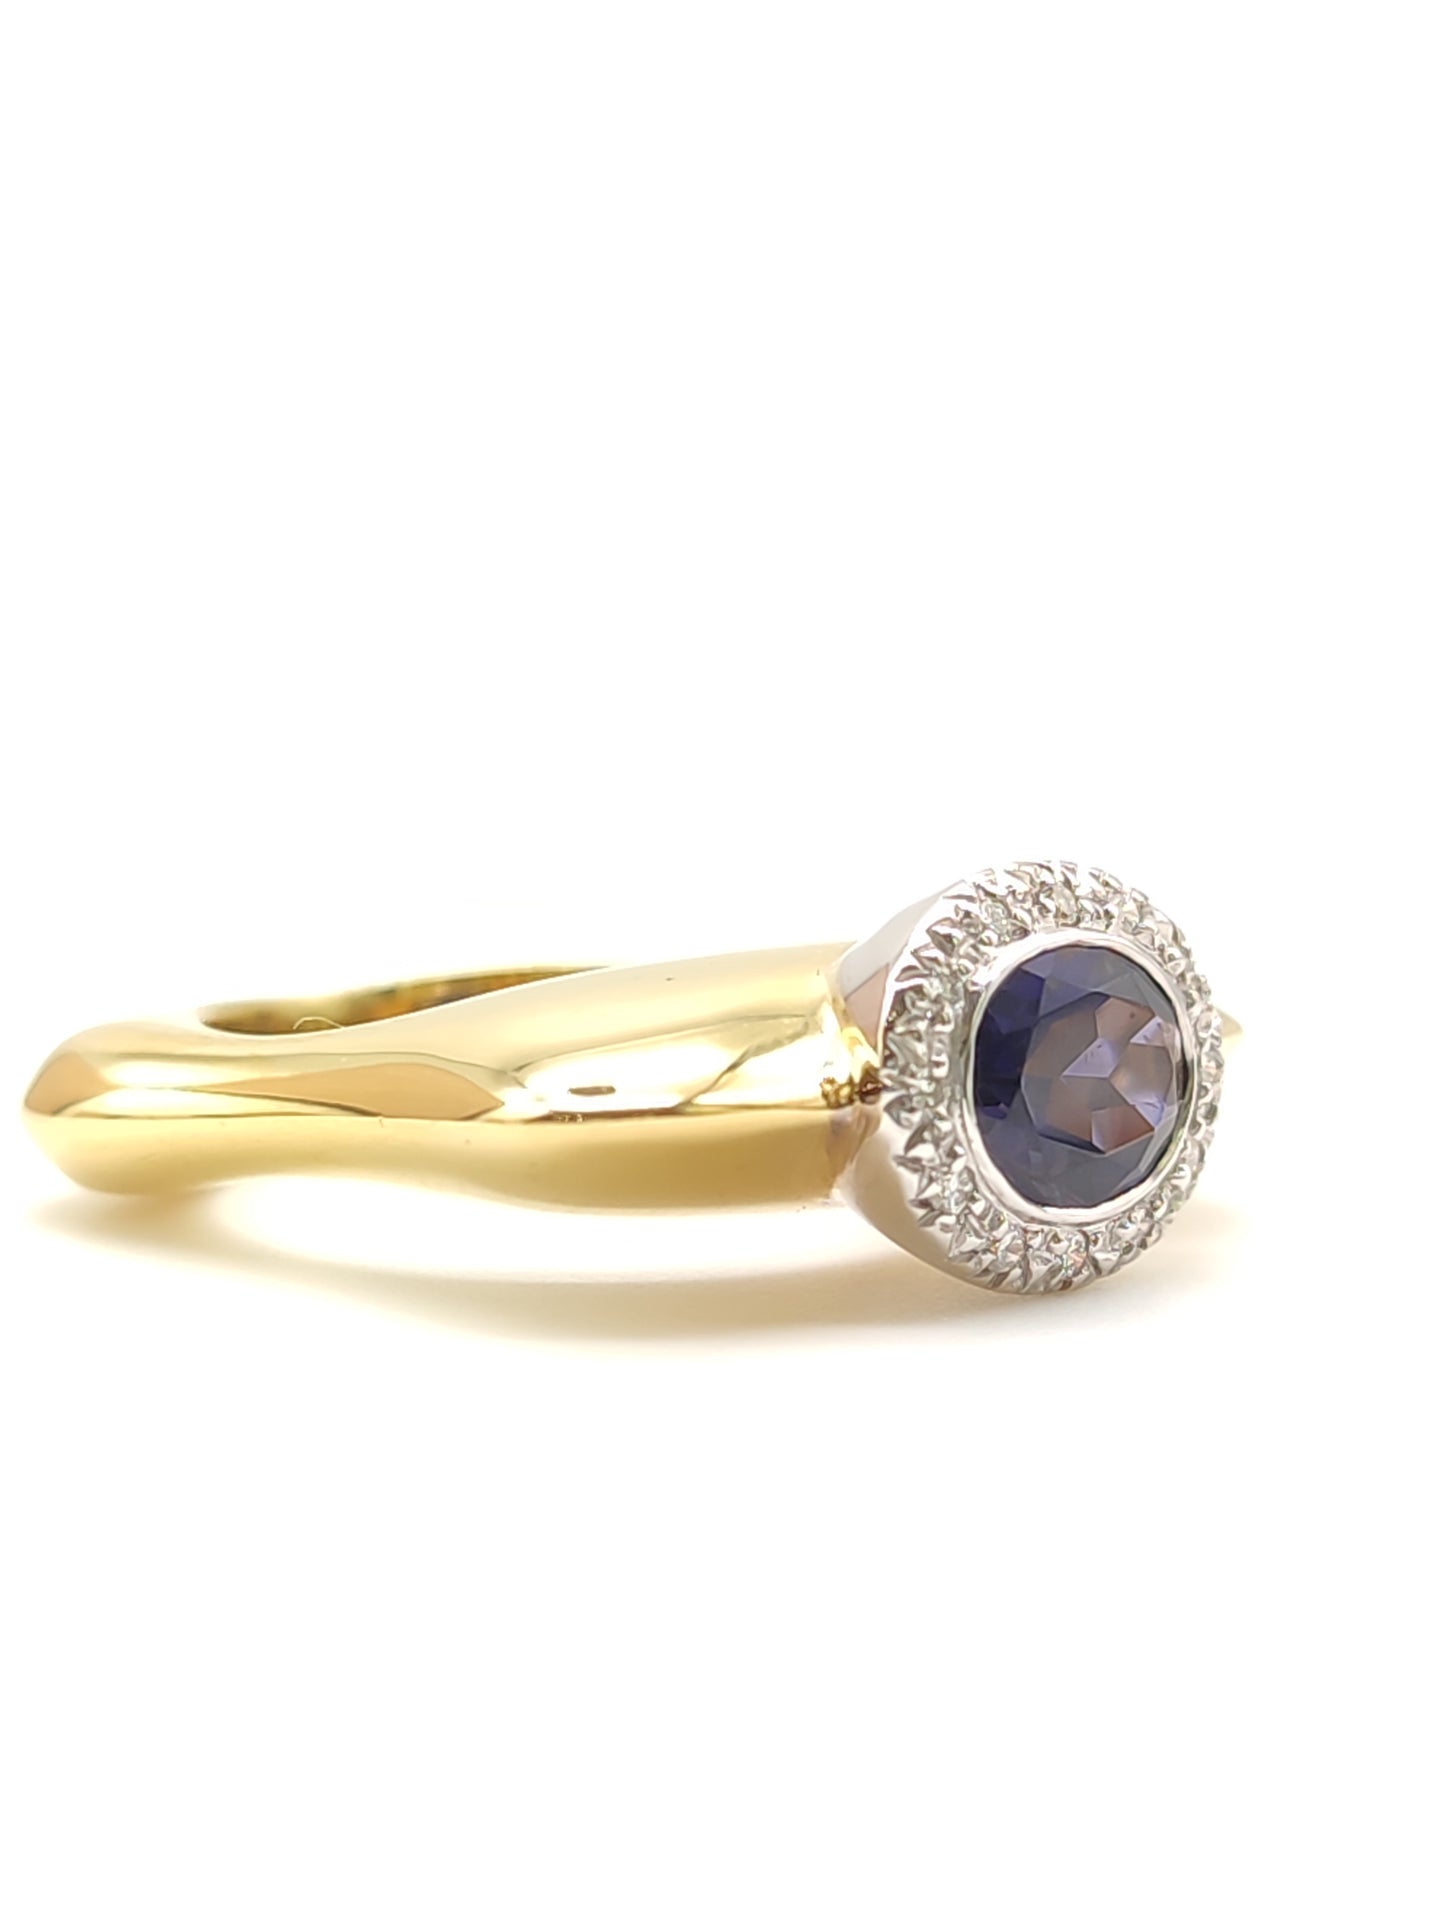 Pavan - Gold ring with Iolite and diamonds